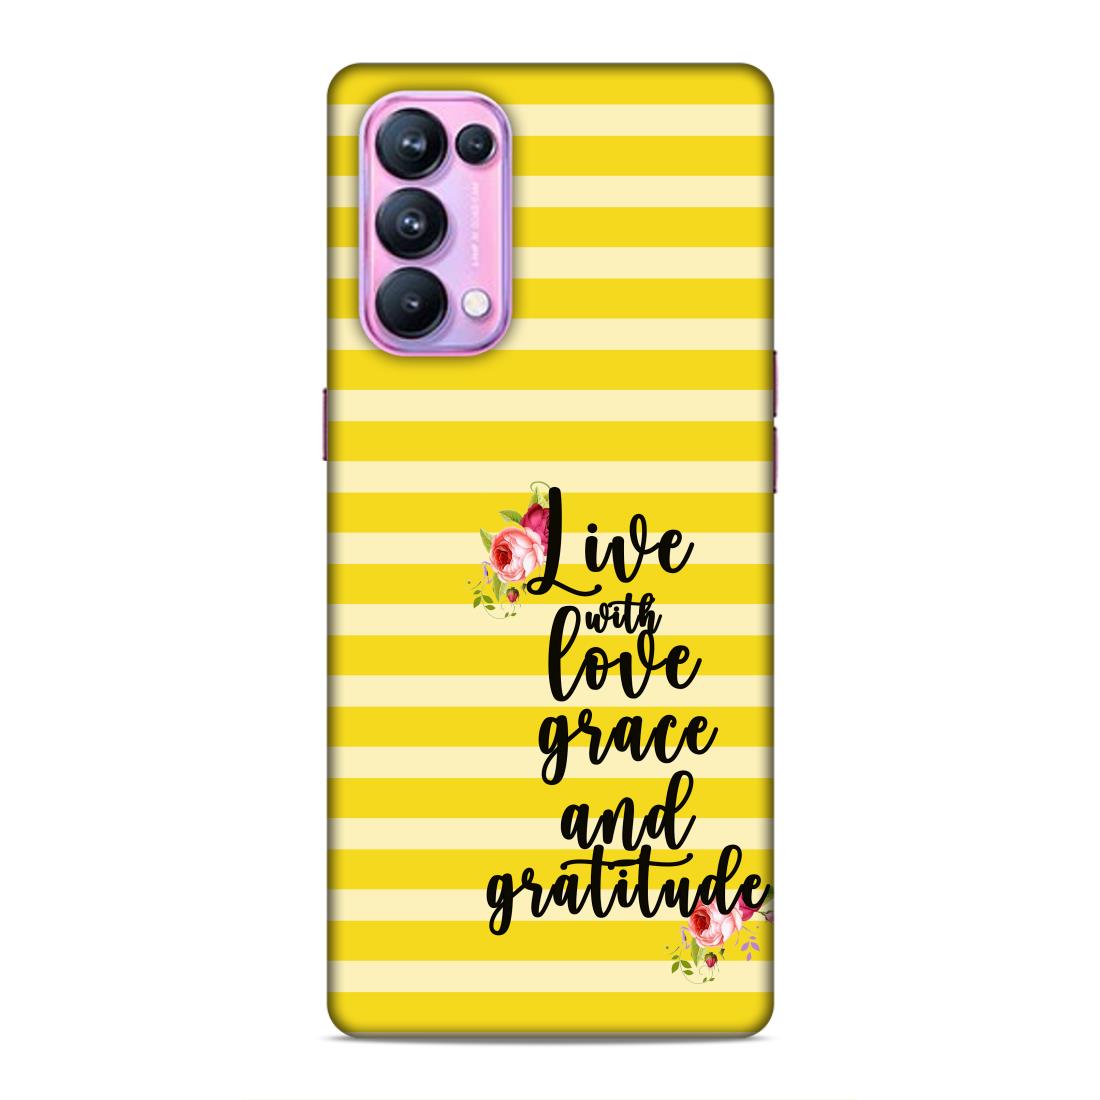 Live with Love Grace and Gratitude Hard Back Case For Oppo Reno 5 Pro